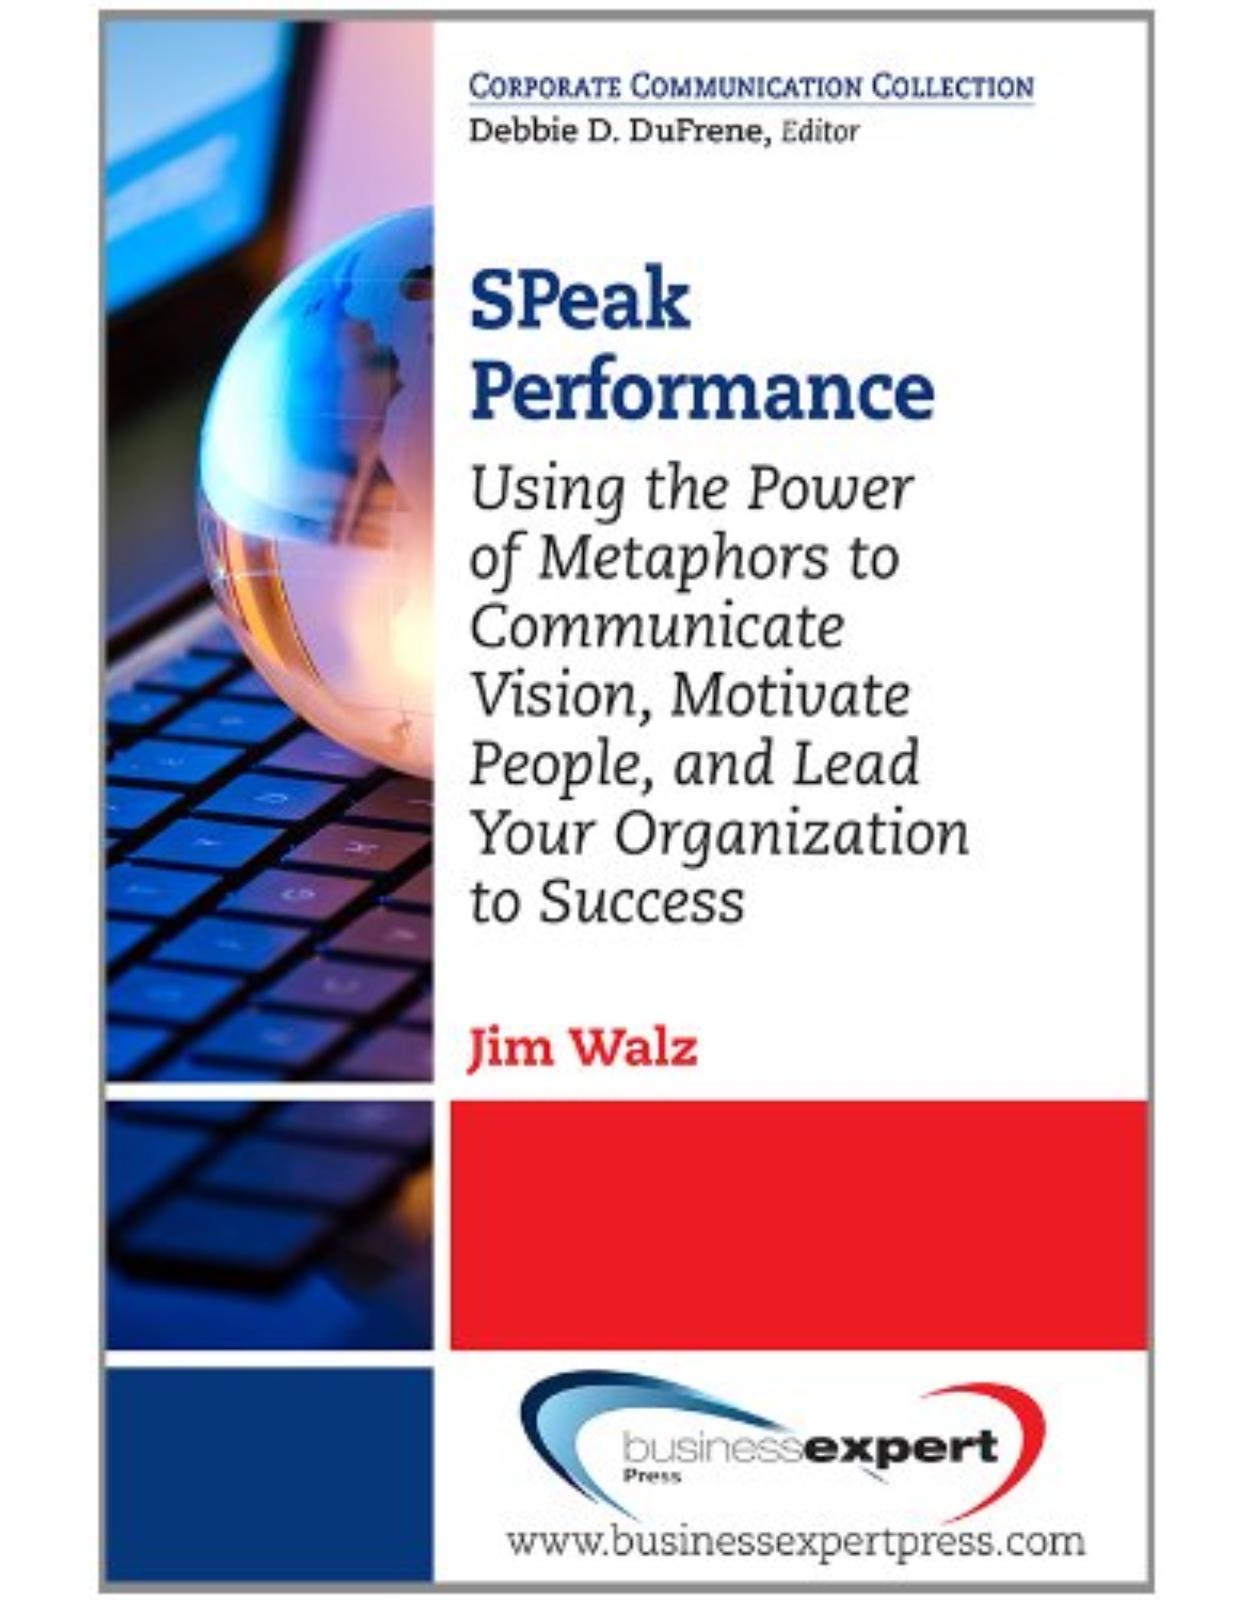 Speak Performance: Using the Power of Metaphors to Communicate Vision, Motivate People, and Lead Your Organization to Success (Corporate Communication Collection)